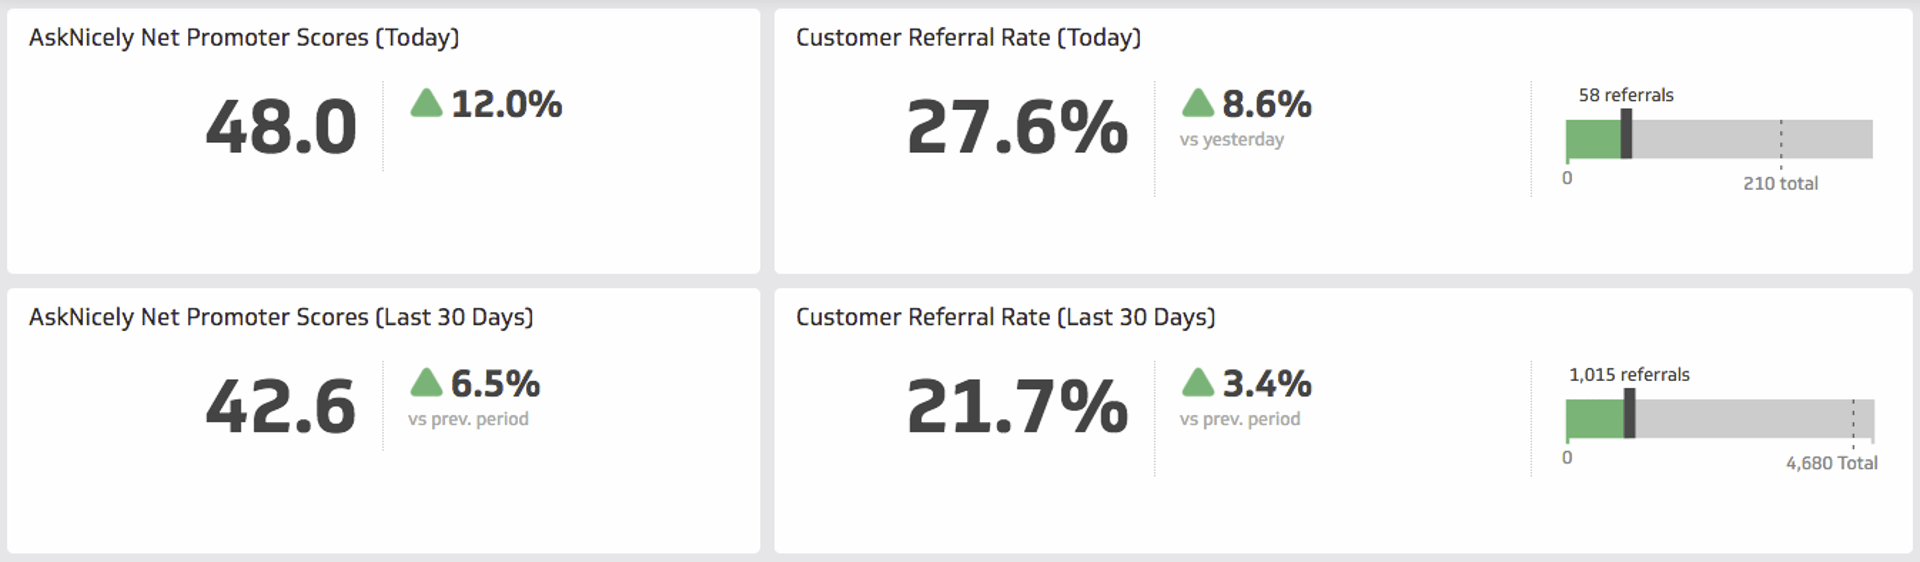 Nps and Customer Referral Rate